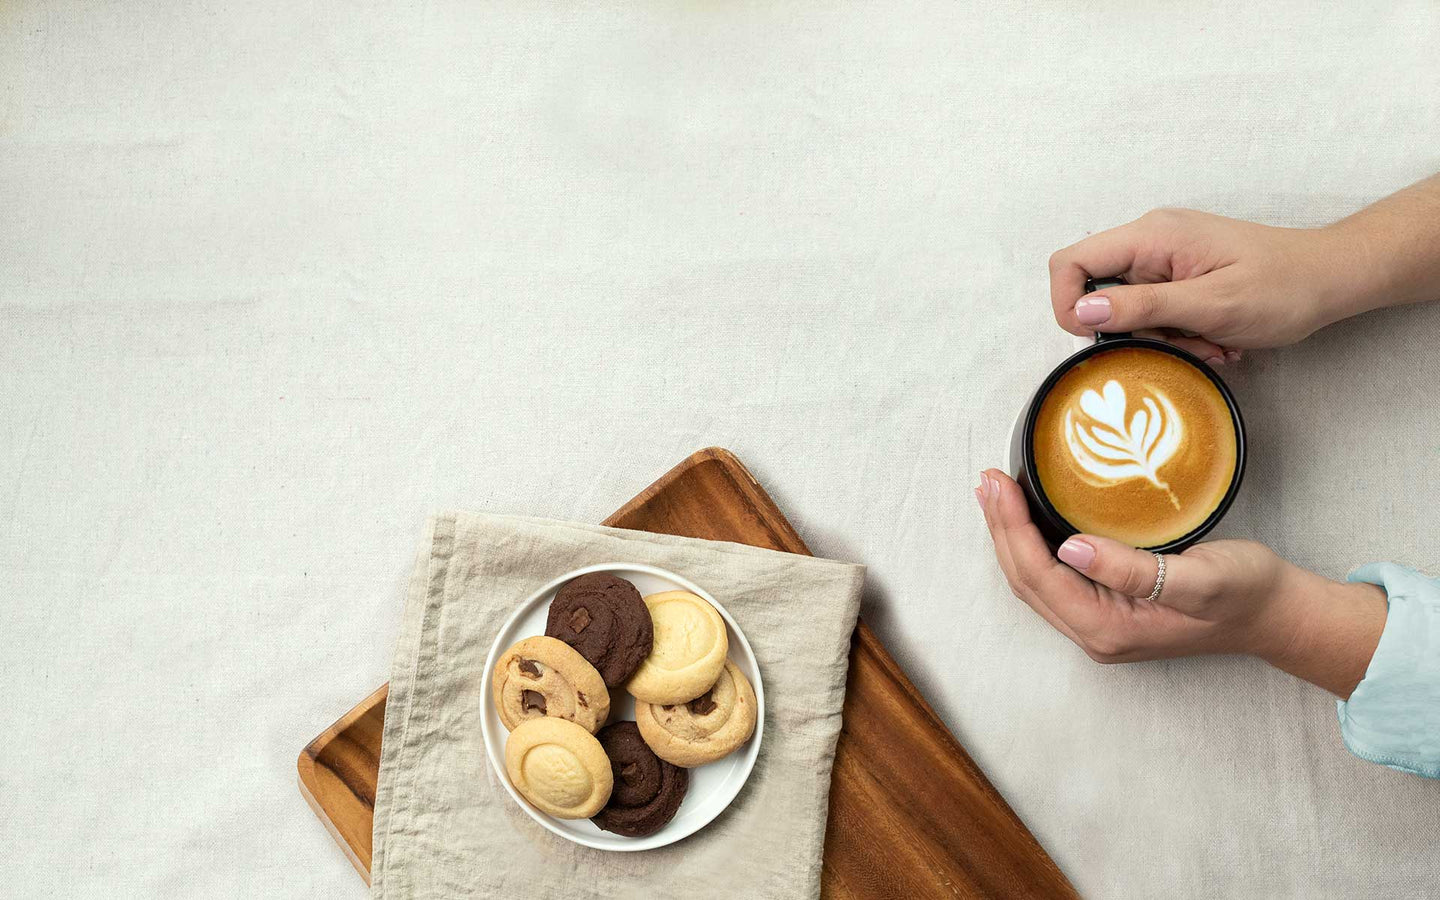 Plate of assorted artisan shortbread cookies with hands holding decorative coffee